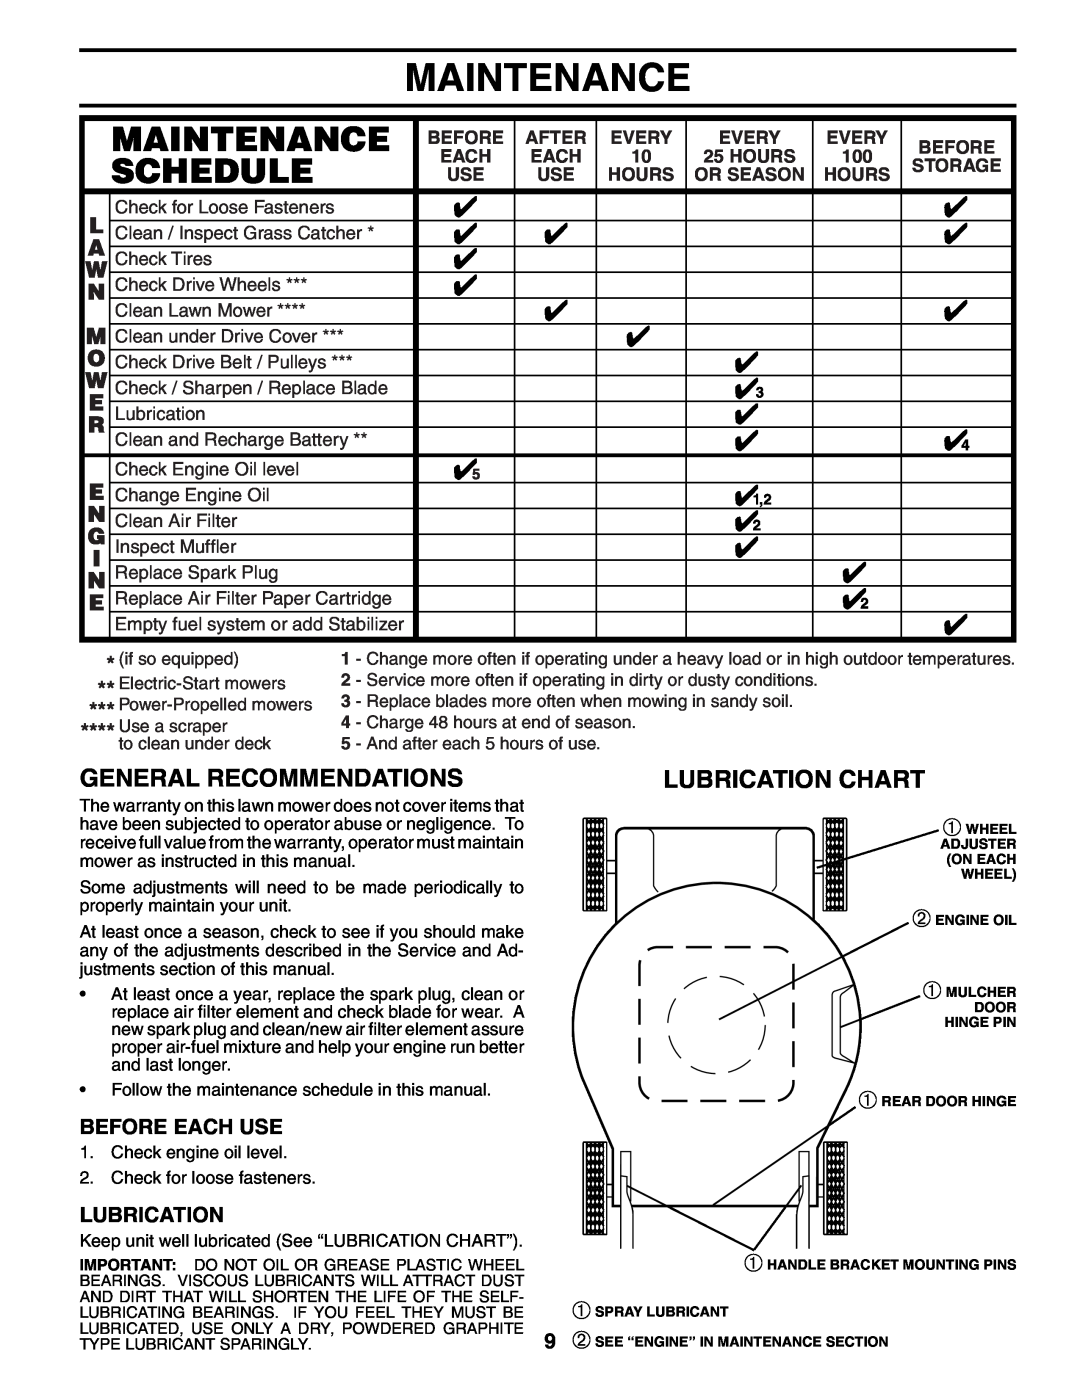 Husqvarna 65022ES Maintenance, General Recommendations, Lubrication Chart, Before Each Use, After, Every, Storage, Hours 